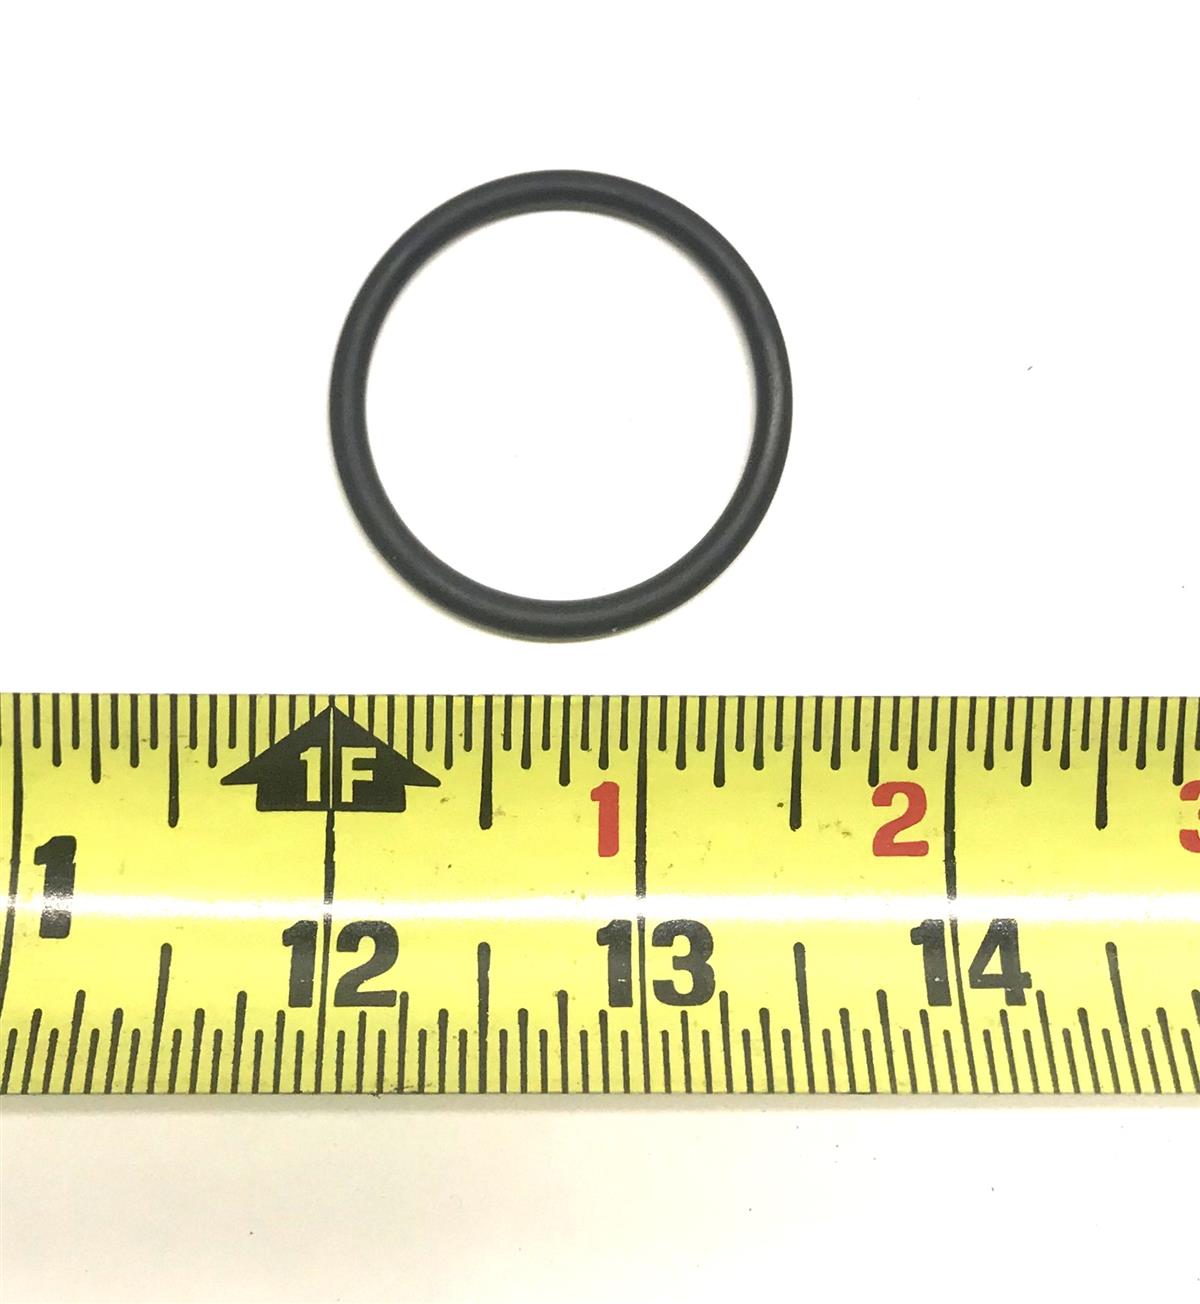 HM-1425 | HM-1425 1.5 in O Ring for Slave Receptacle and Cable Assemblies, HMMWV (2).jpg